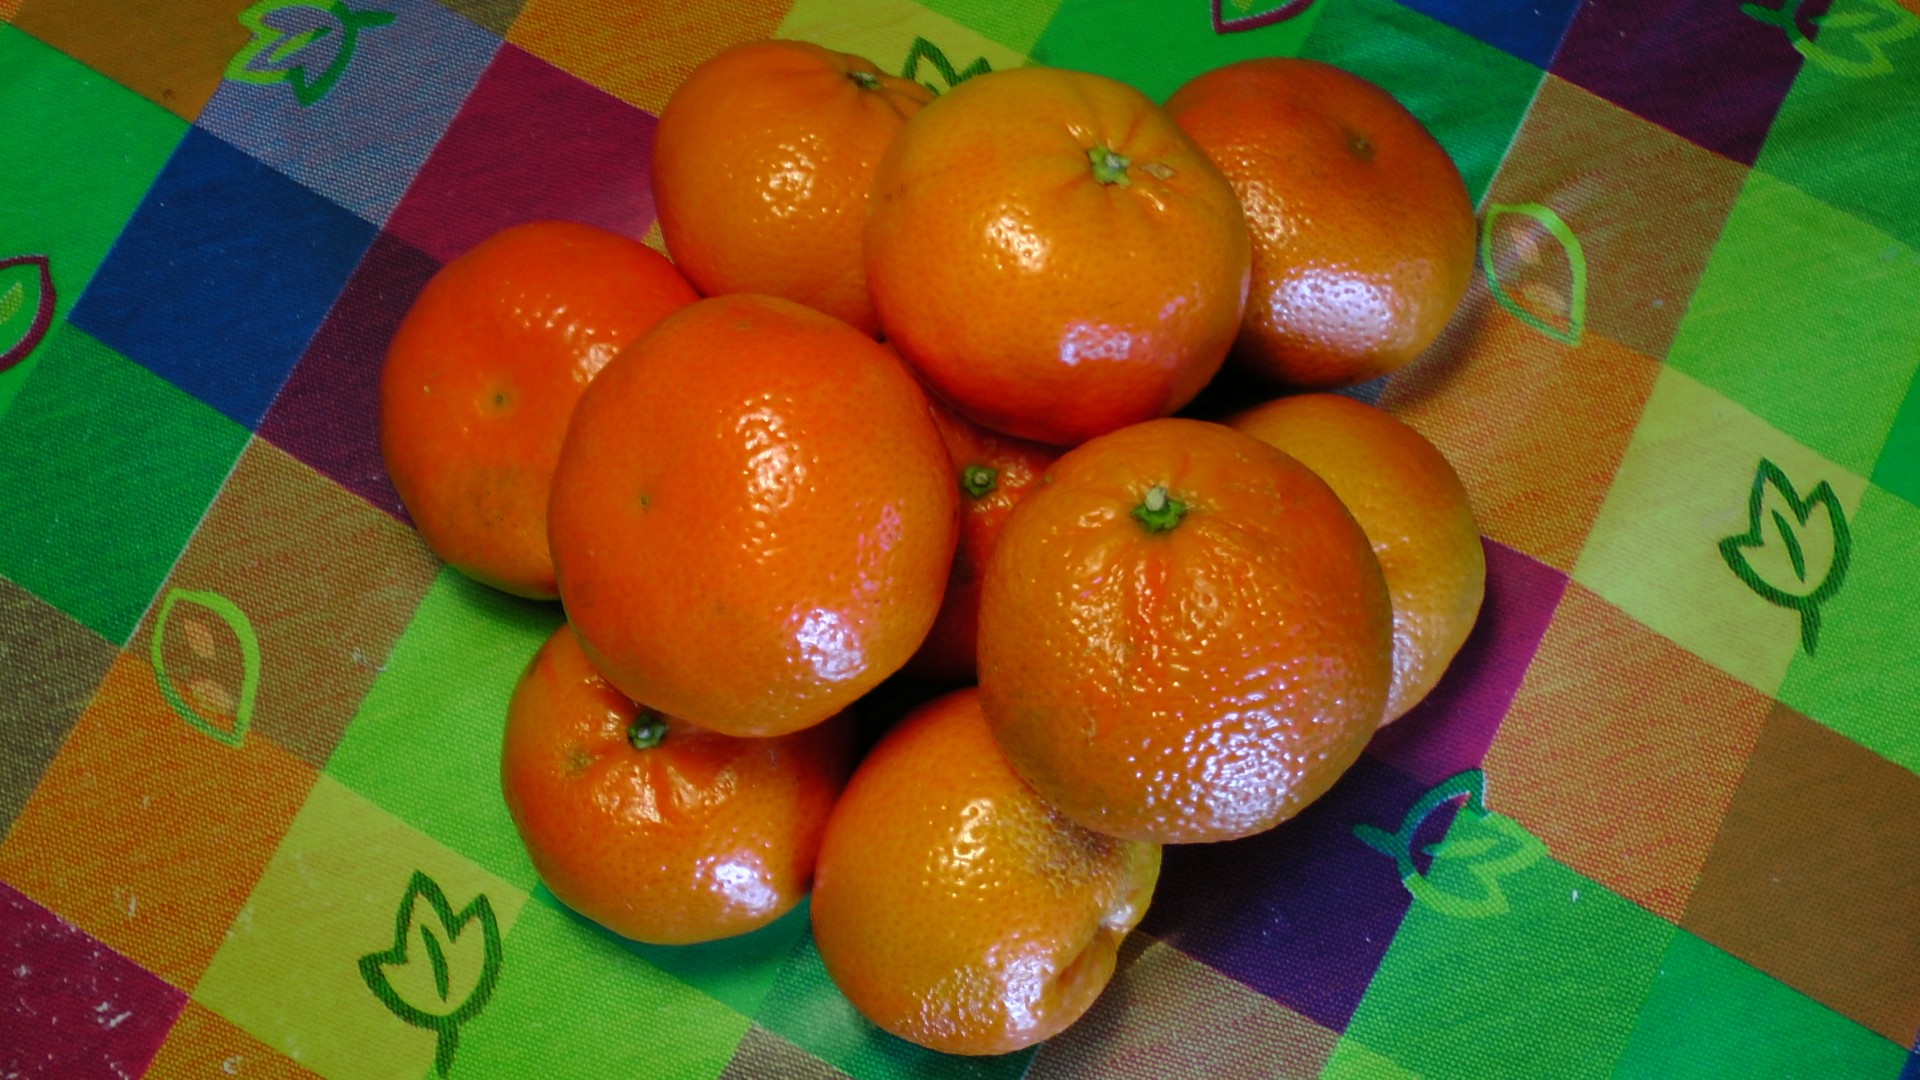 Clementines From The Market